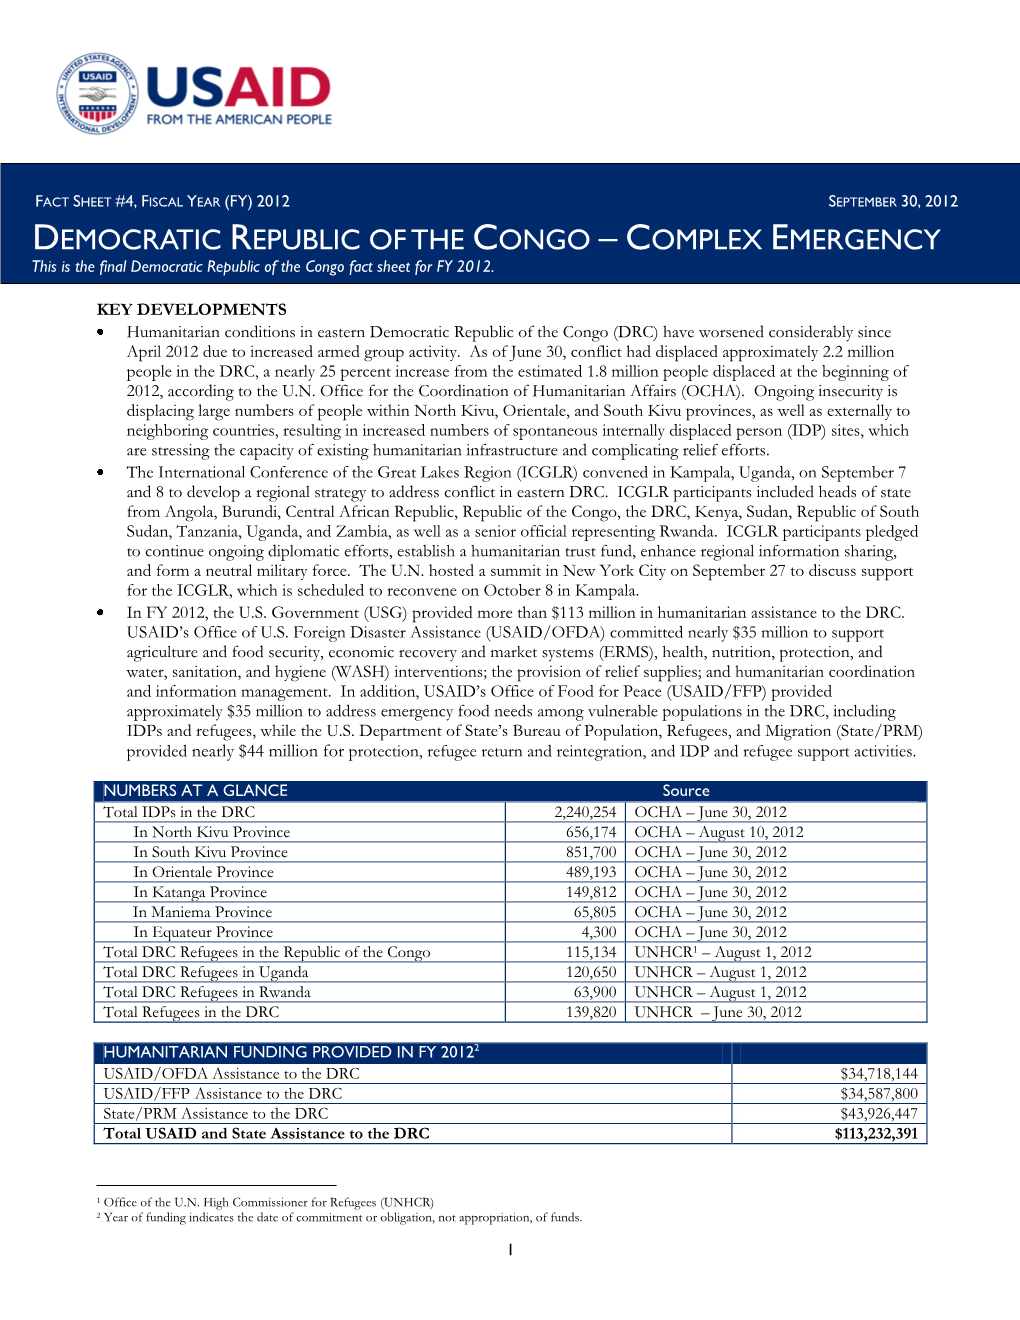 COMPLEX EMERGENCY This Is the Final Democratic Republic of the Congo Fact Sheet for FY 2012